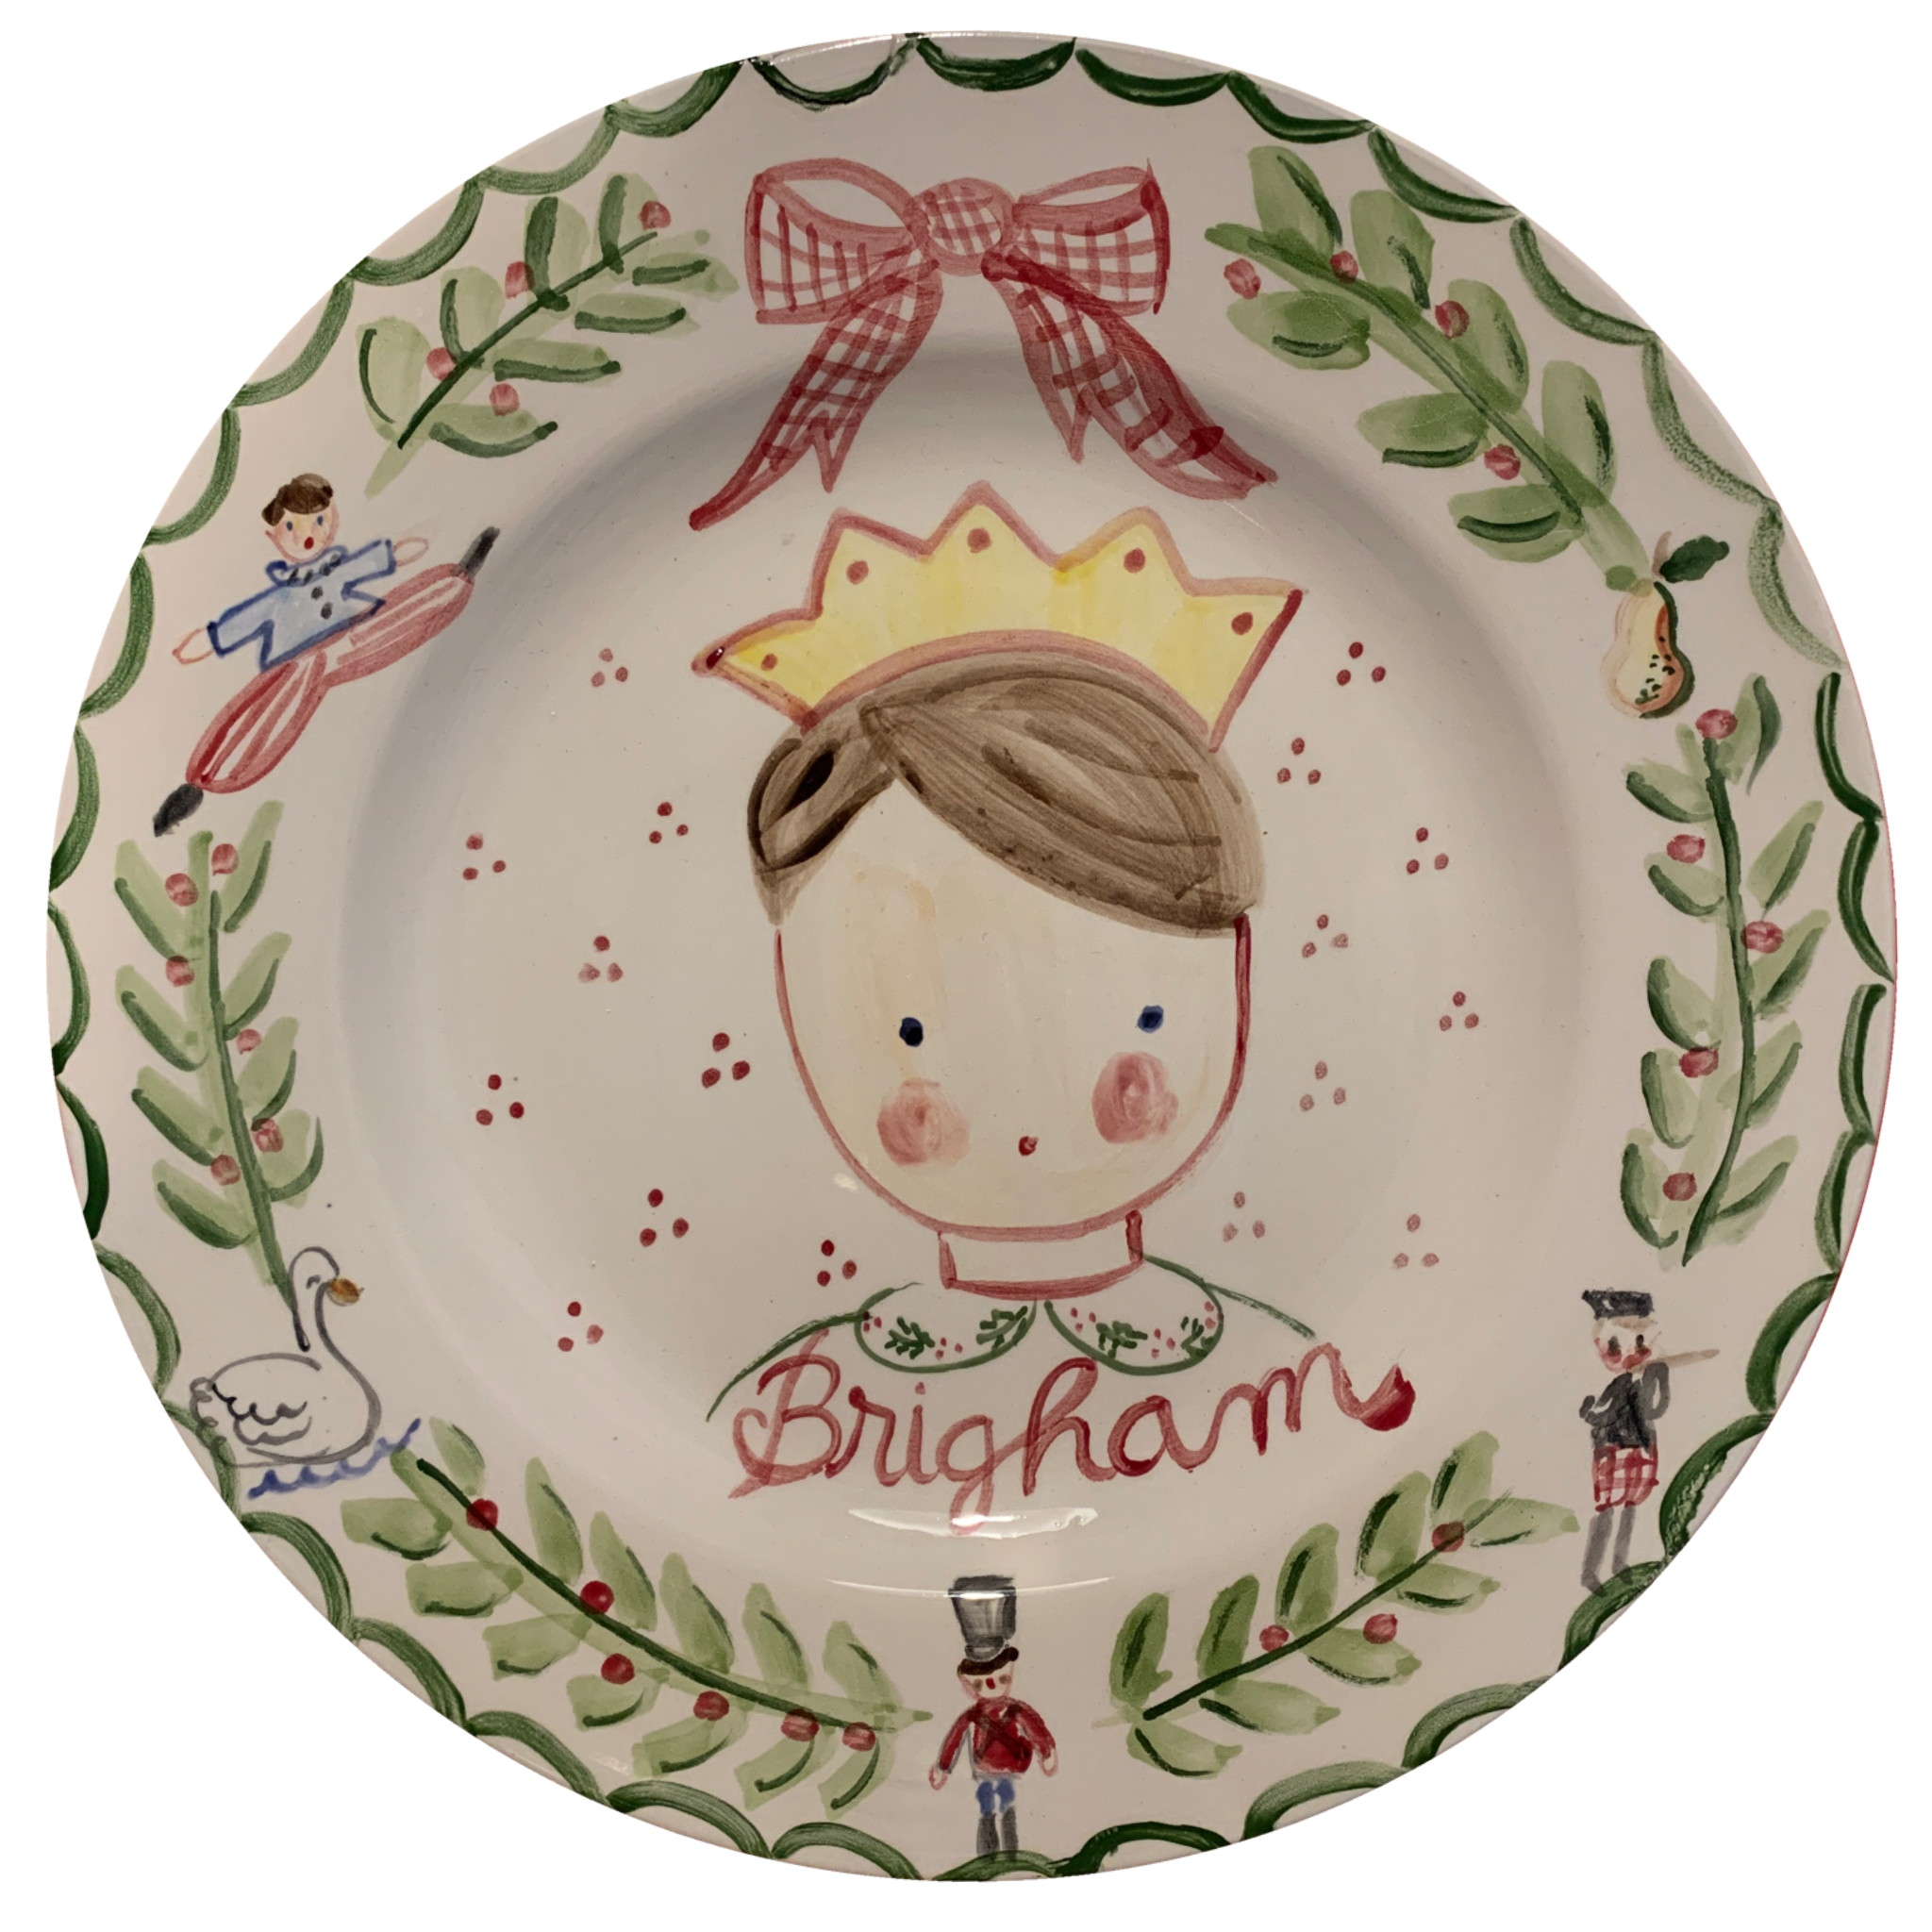 Tricia Lowenfield Design - 12 Days of Christmas Plate - Boy - Premium  from Tricia Lowenfield Design 